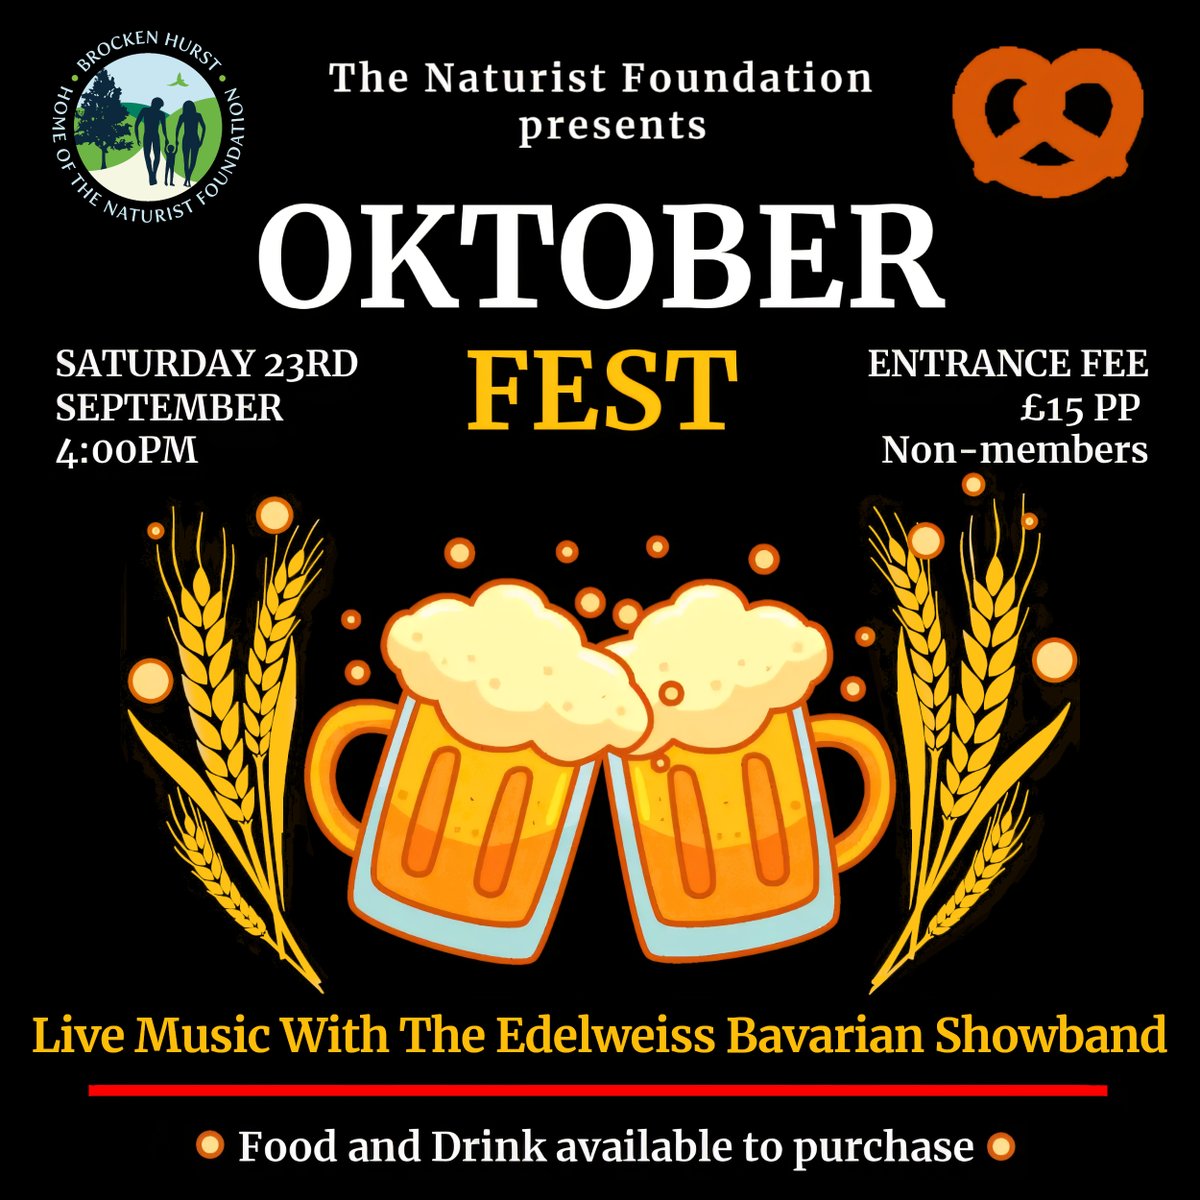 The German beer will start following tomorrow at 4pm for our #Oktoberfest, with 'ABK Hell' lager and live oompah music from The Edelweiss Bavarian Showband.

Charge you steins here!
🍻 naturistfoundation.org/oktoberfest
#Prost!

#Oktoberfest2023 #Wiesn2023 #BeerFestival #beer